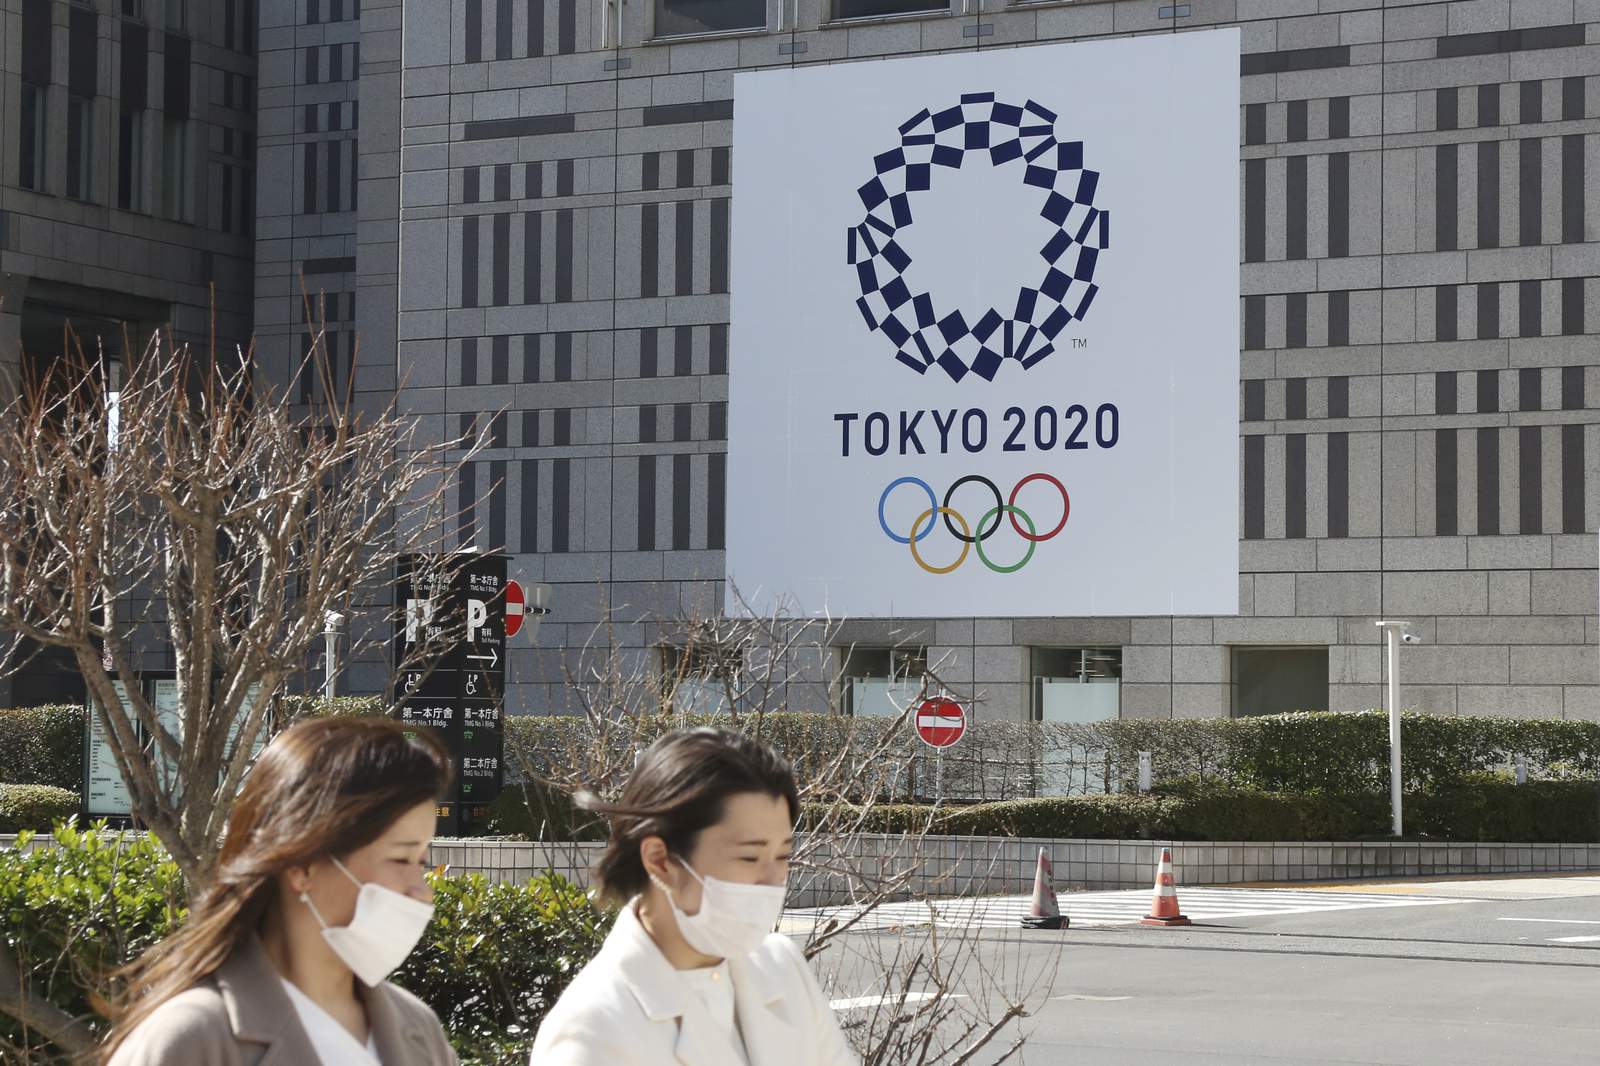 Fans from abroad unlikely for postponed Tokyo Olympics